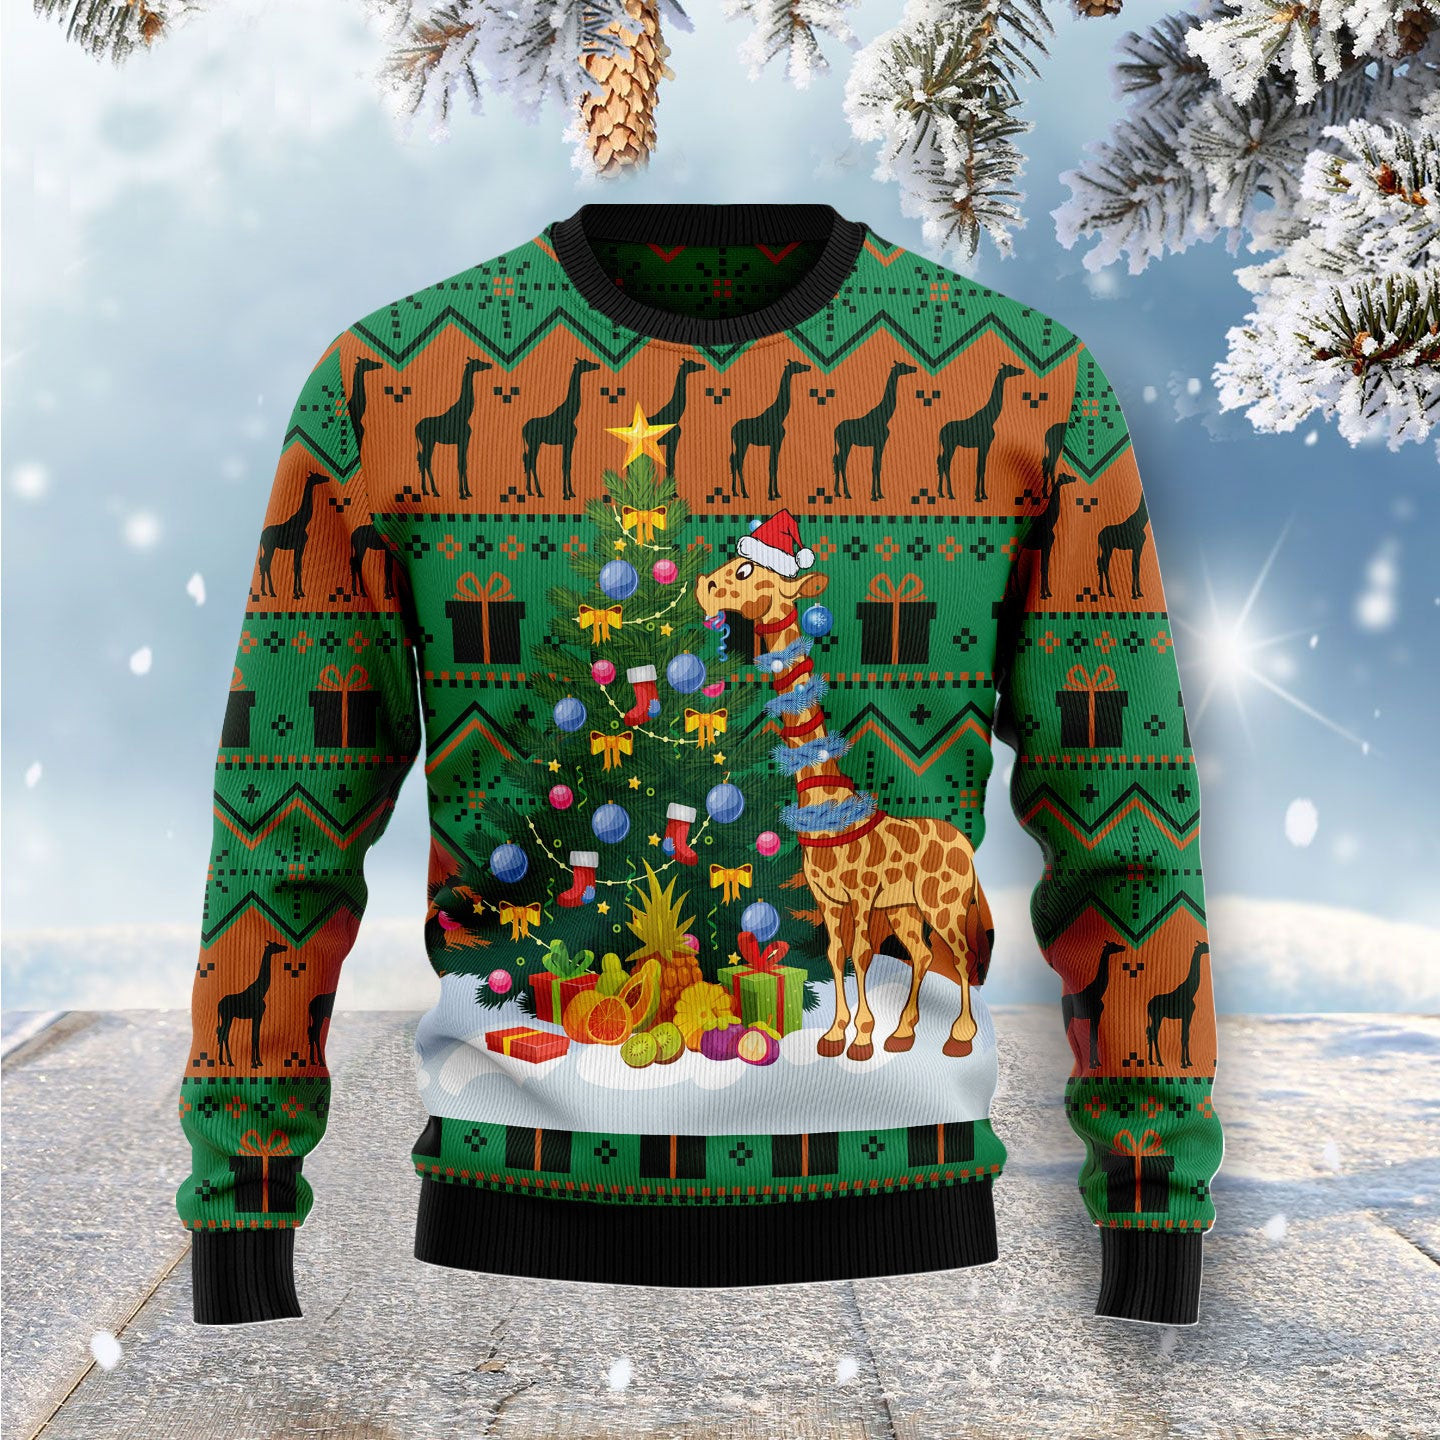 Christmas Tree Giraffe Ugly Christmas Sweater, Ugly Sweater For Men Women, Holiday Sweater